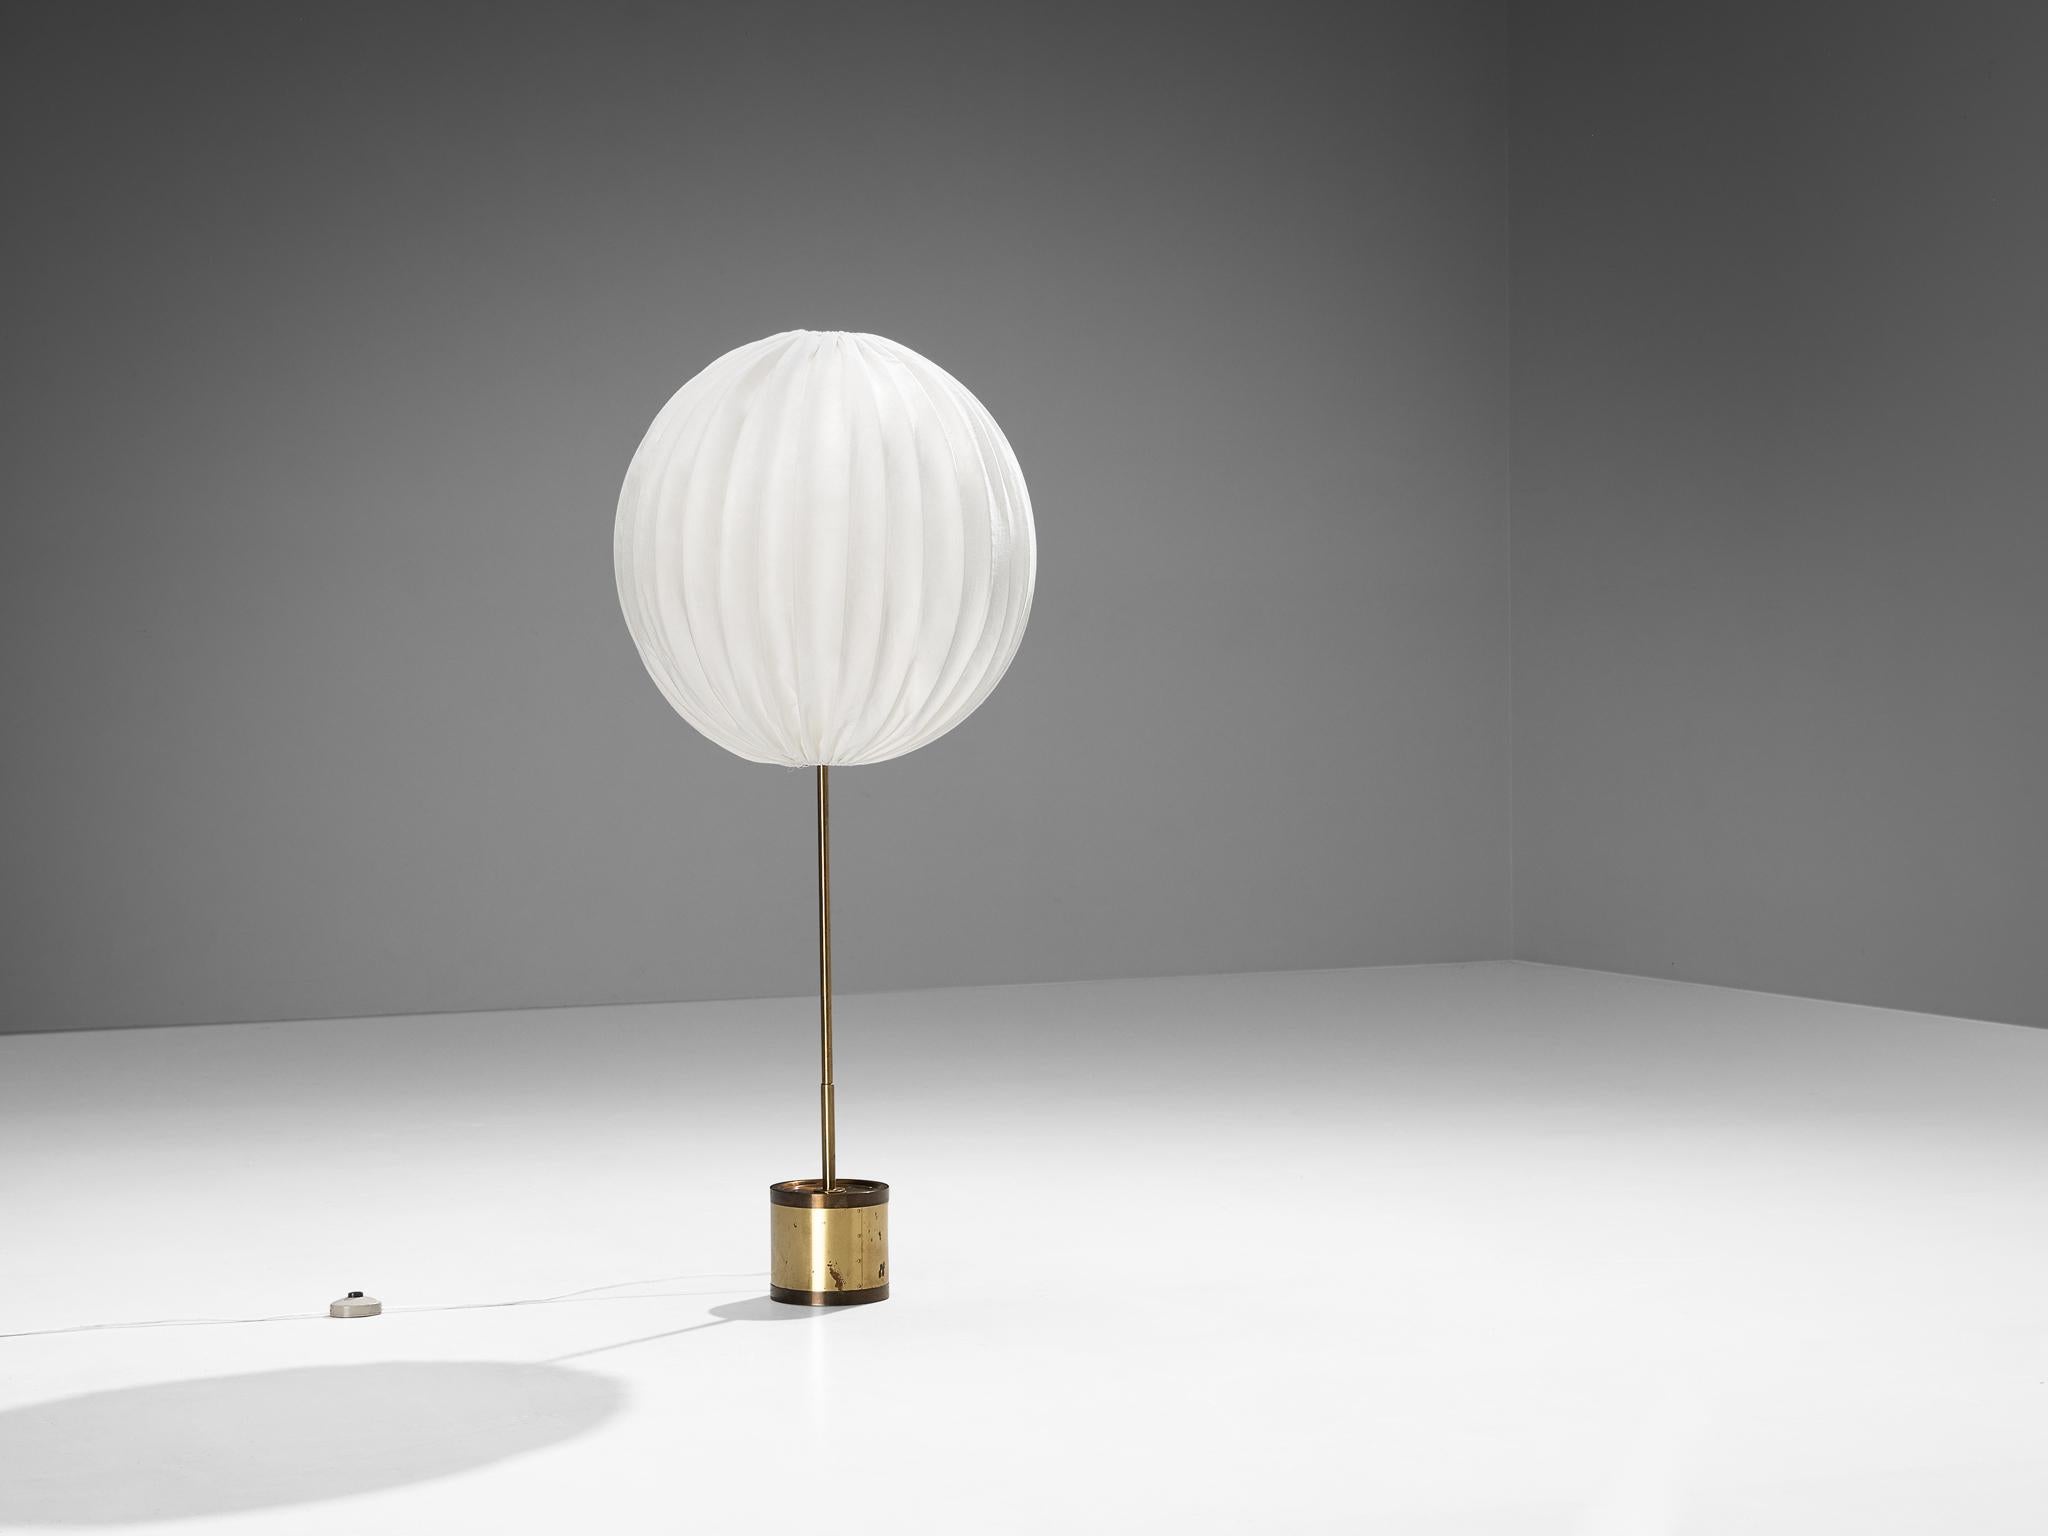 Hans Agne Jakobsson 'Balloon' Floor Lamp with Off-White Shade 2